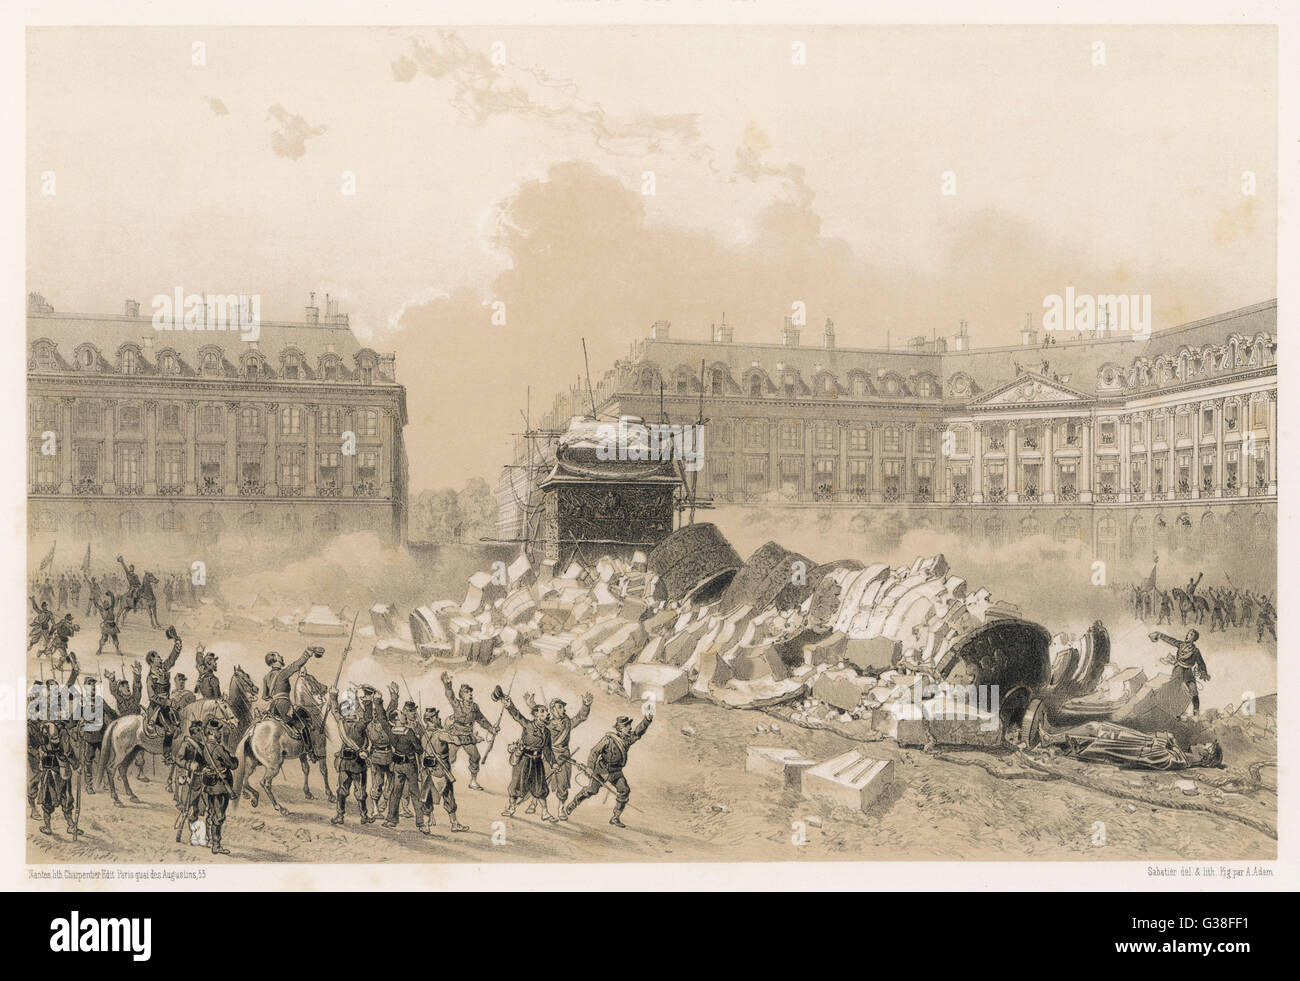 The Colonne de la Place  Vendome, Paris, surmounted  with a statue of Napoleon, is  pulled down by the Communards       Date: 16 May 1871 Stock Photo